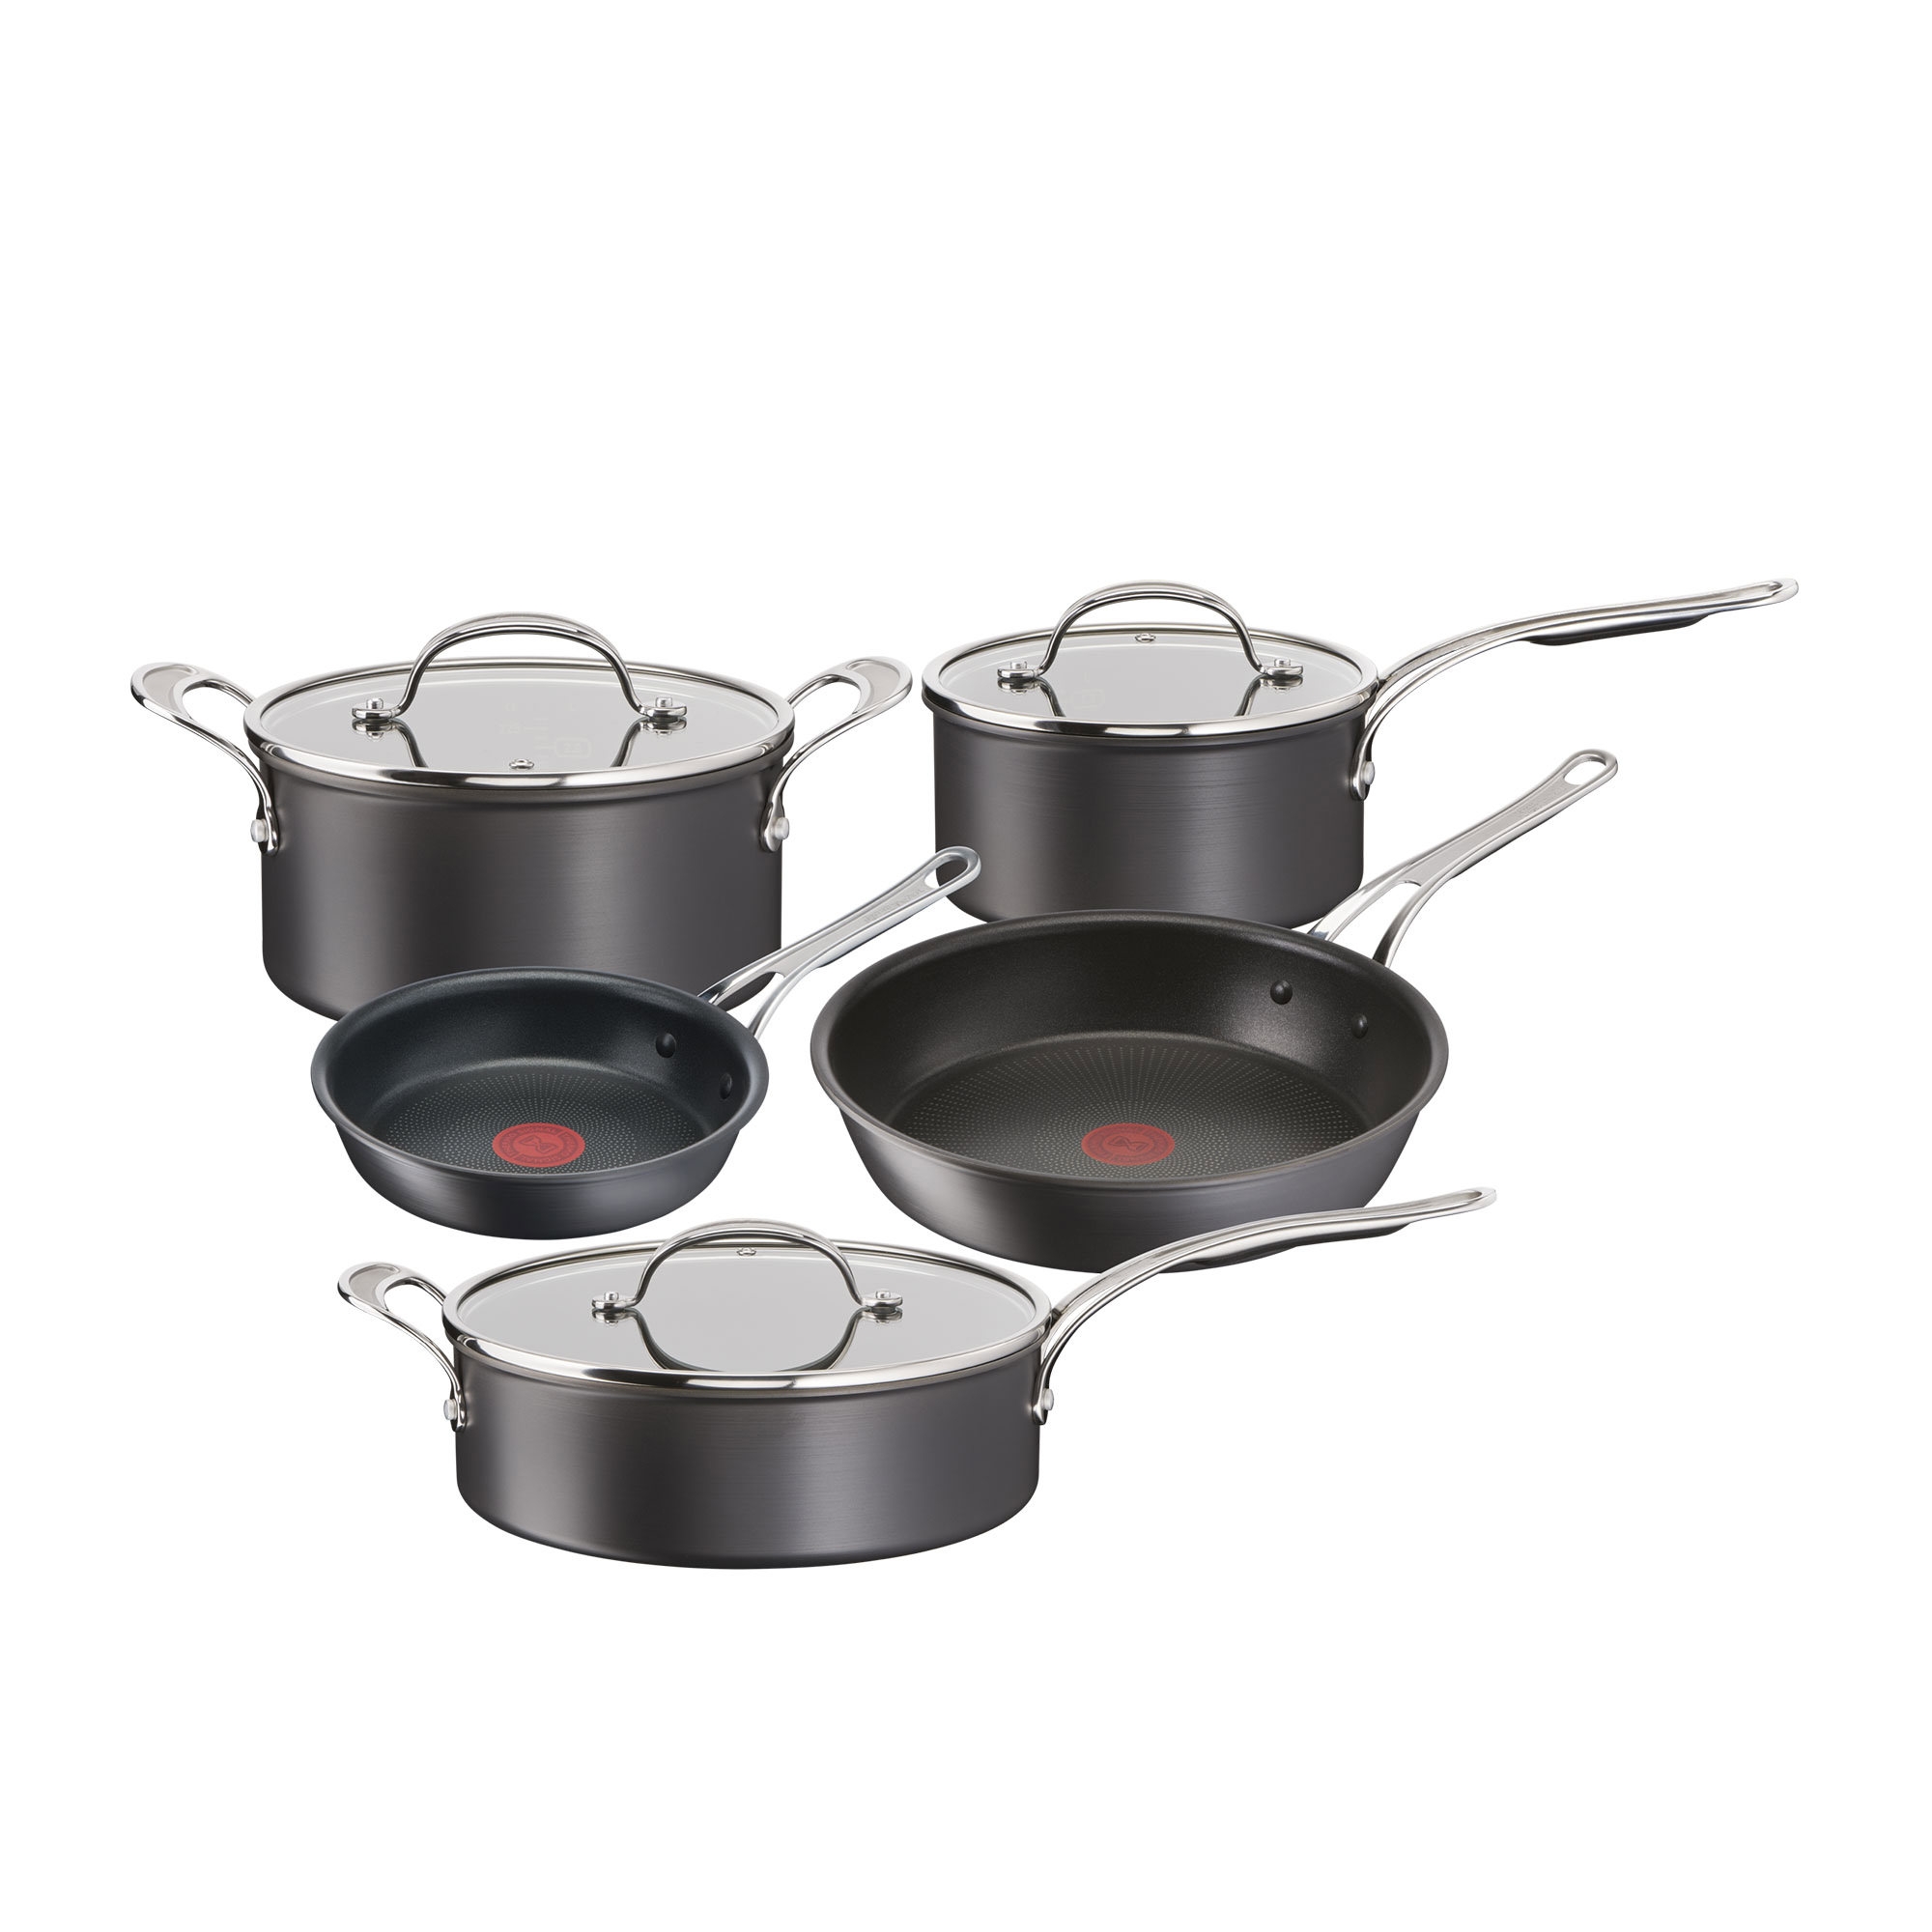 Jamie Oliver by Tefal Cook's Classic 5pc Hard Anodised Induction Cookware Set Image 1